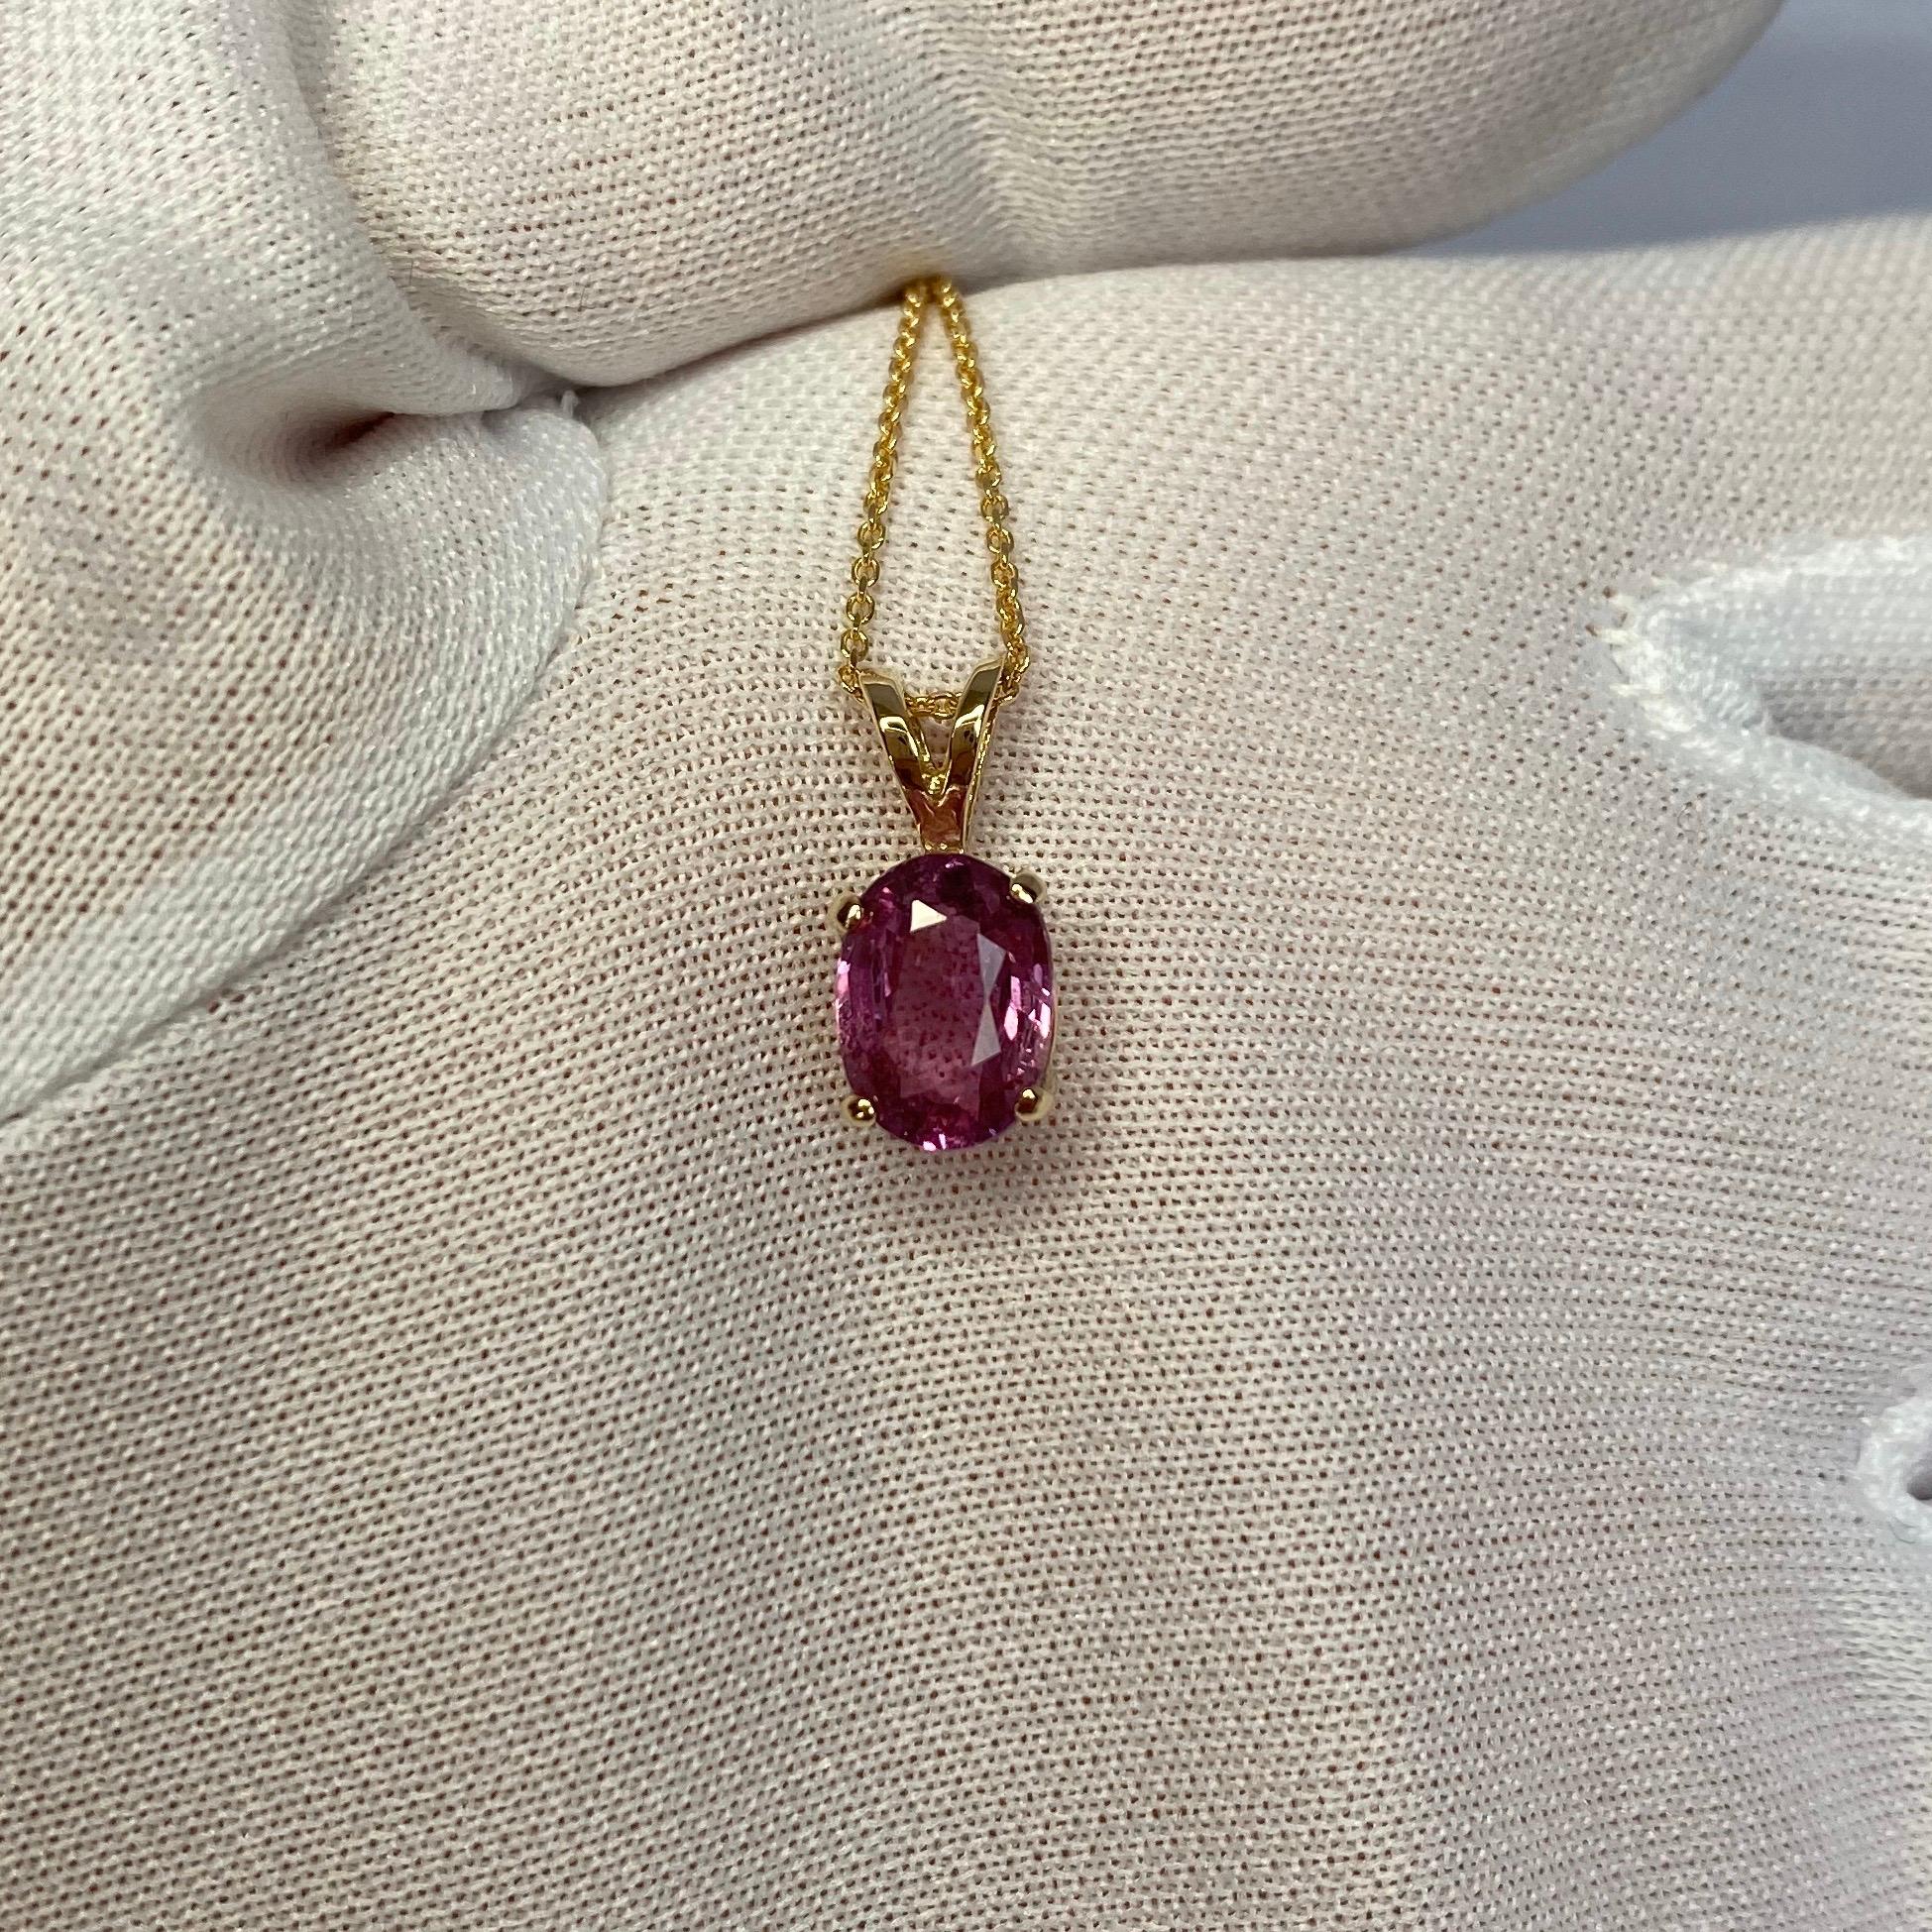 IGI Certified Untreated 1.61ct Pink Purple Sapphire Solitaire Pendant Necklace 4